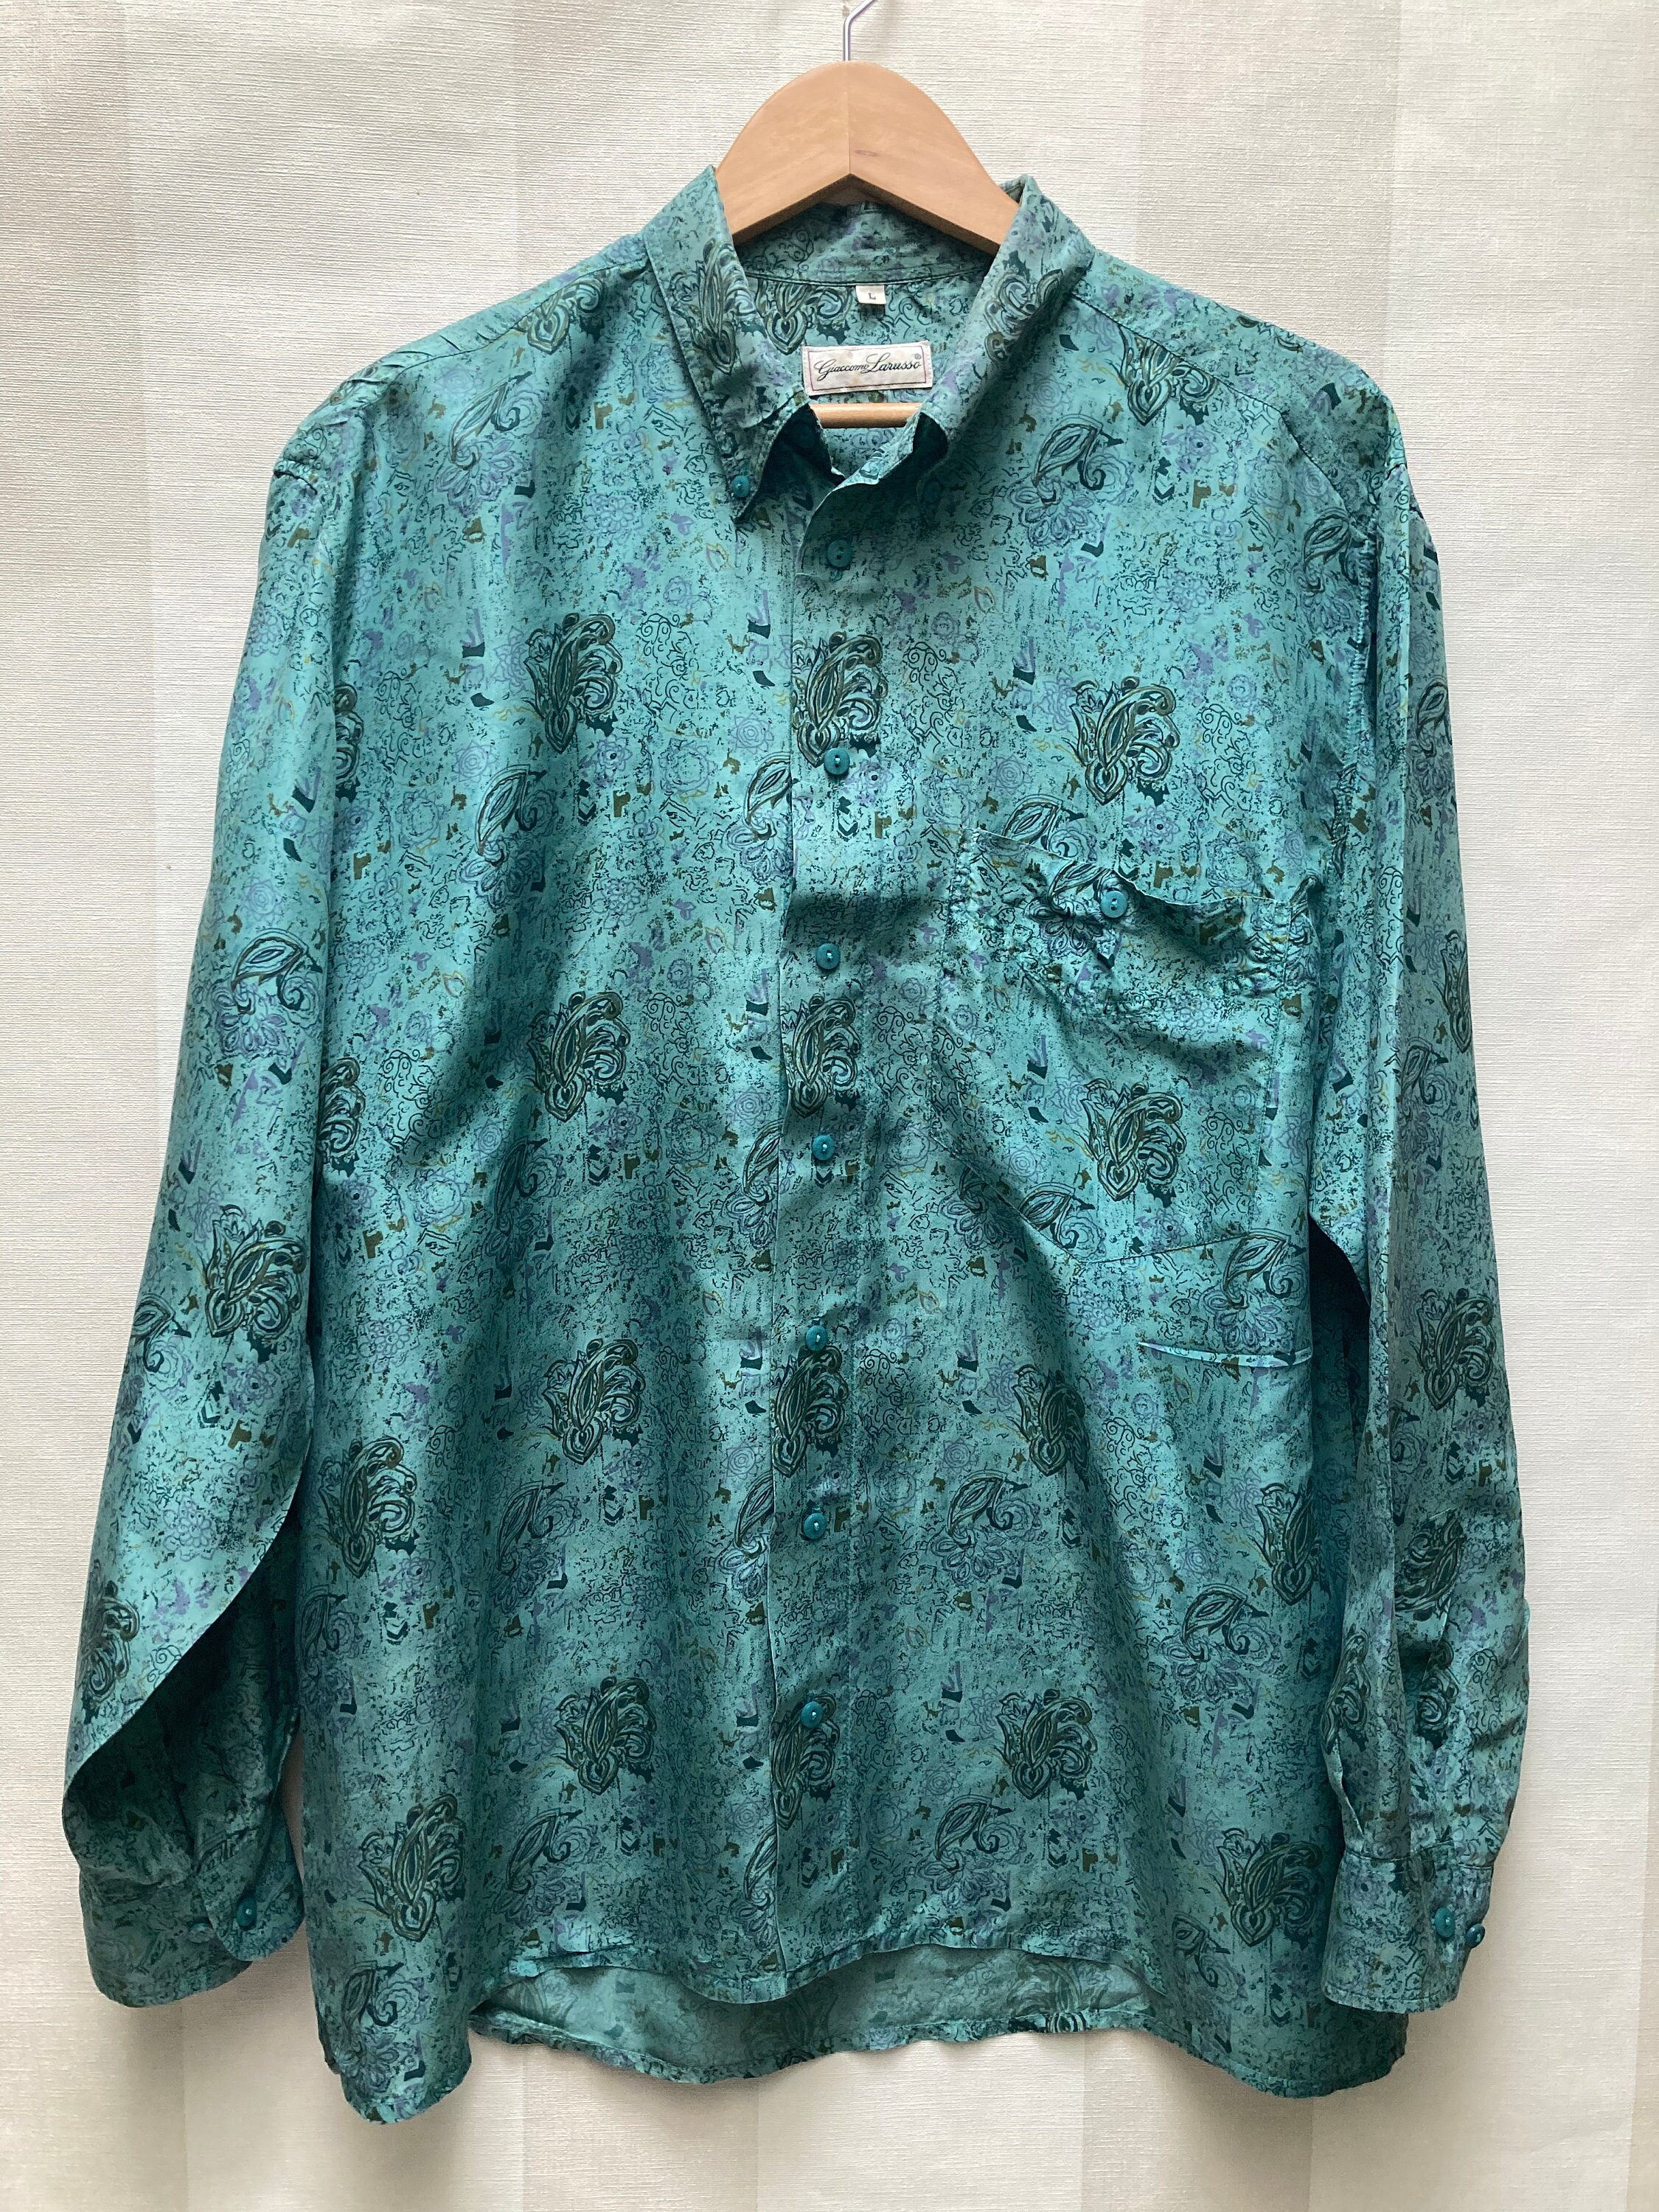 Turquoise Pure Satin Silk Shirt Style Collared Button Down Blouse